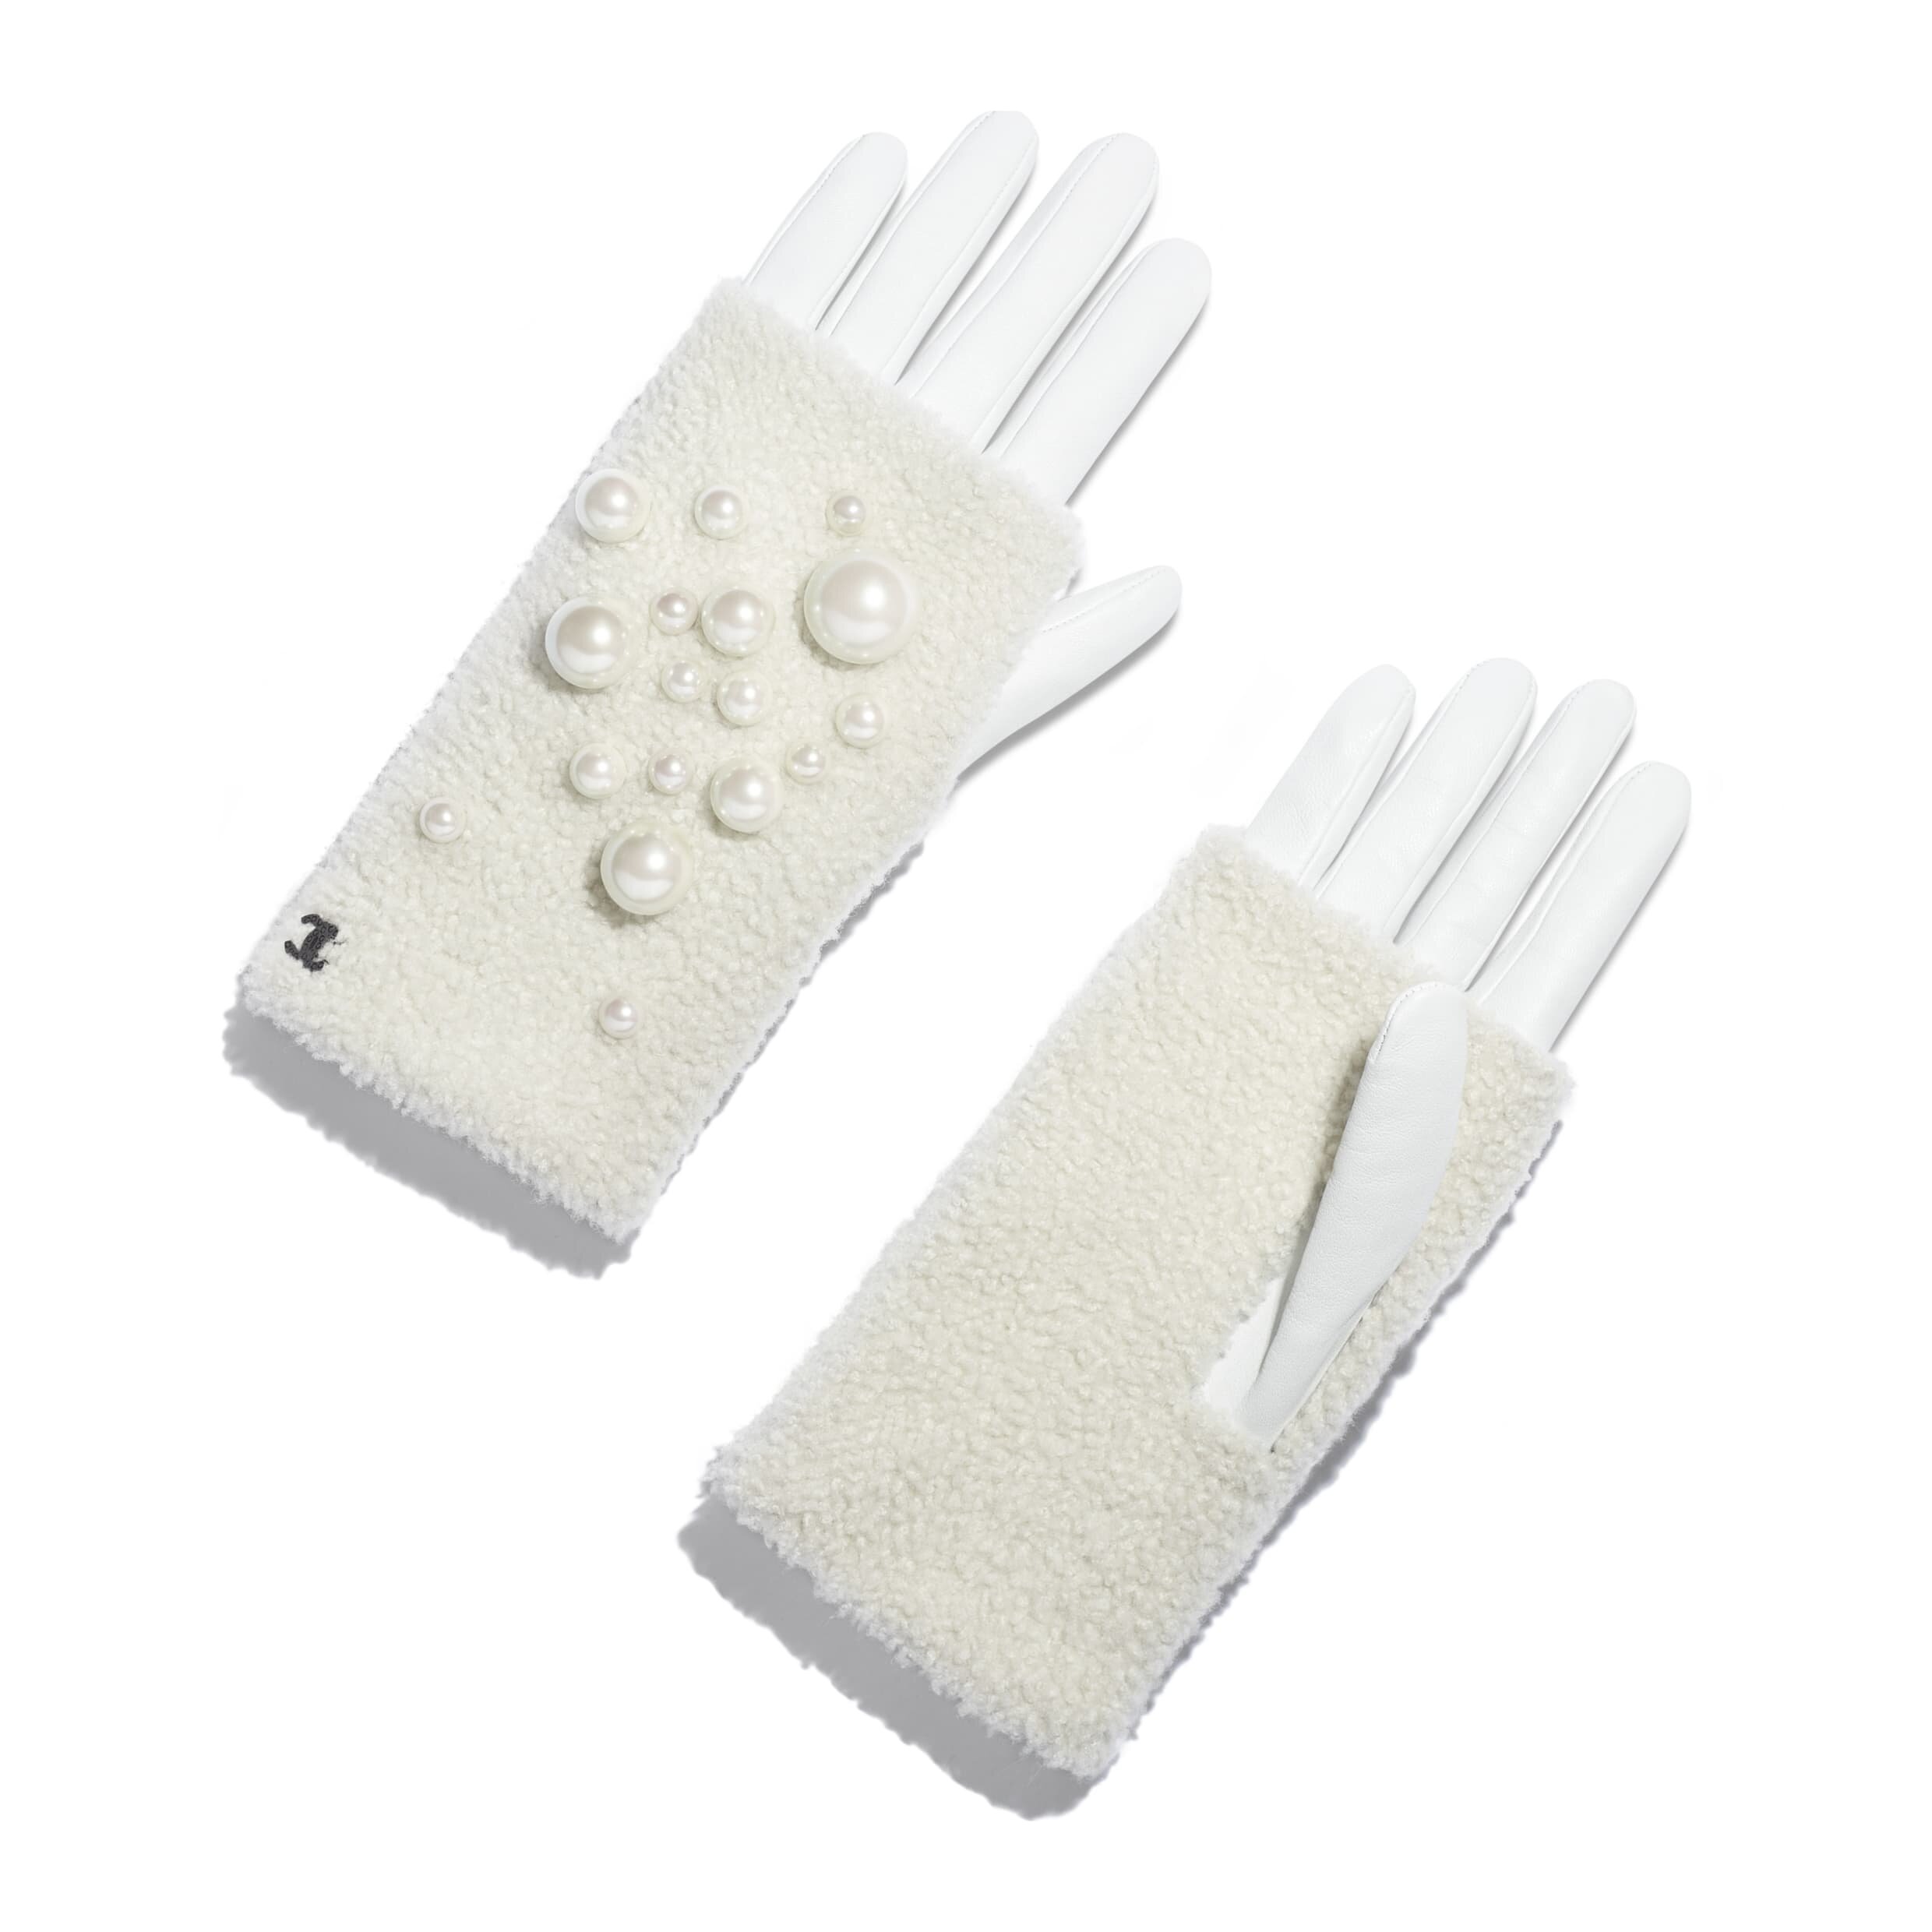 gloves-white-ivory-lambskin-shearling-pearls-lambskin-shearling-pearls-packshot-default-aa0754y11937c9927-8819817054238.jpg